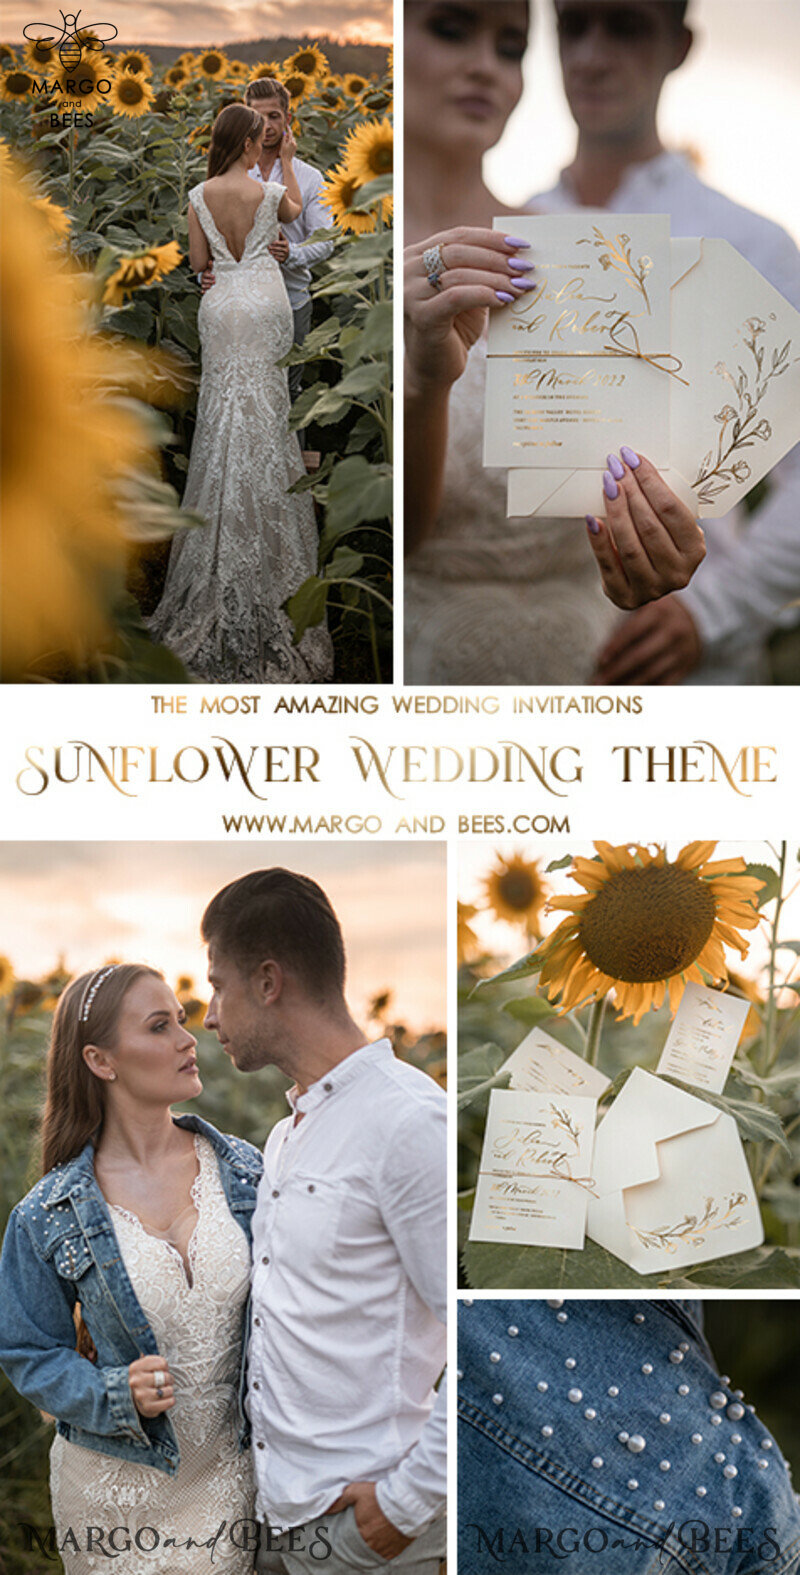 Exquisite and Personalized: Elegant Custom Wedding Cards with a Touch of Gold and Nude
Elevate your Wedding with Bespoke Glamour: Golden Nude Wedding Invitations for a Luxurious Celebration
Romantic Charm meets Simple Elegance: Customized Minimalistic Wedding Stationery that Sets the Tone-6